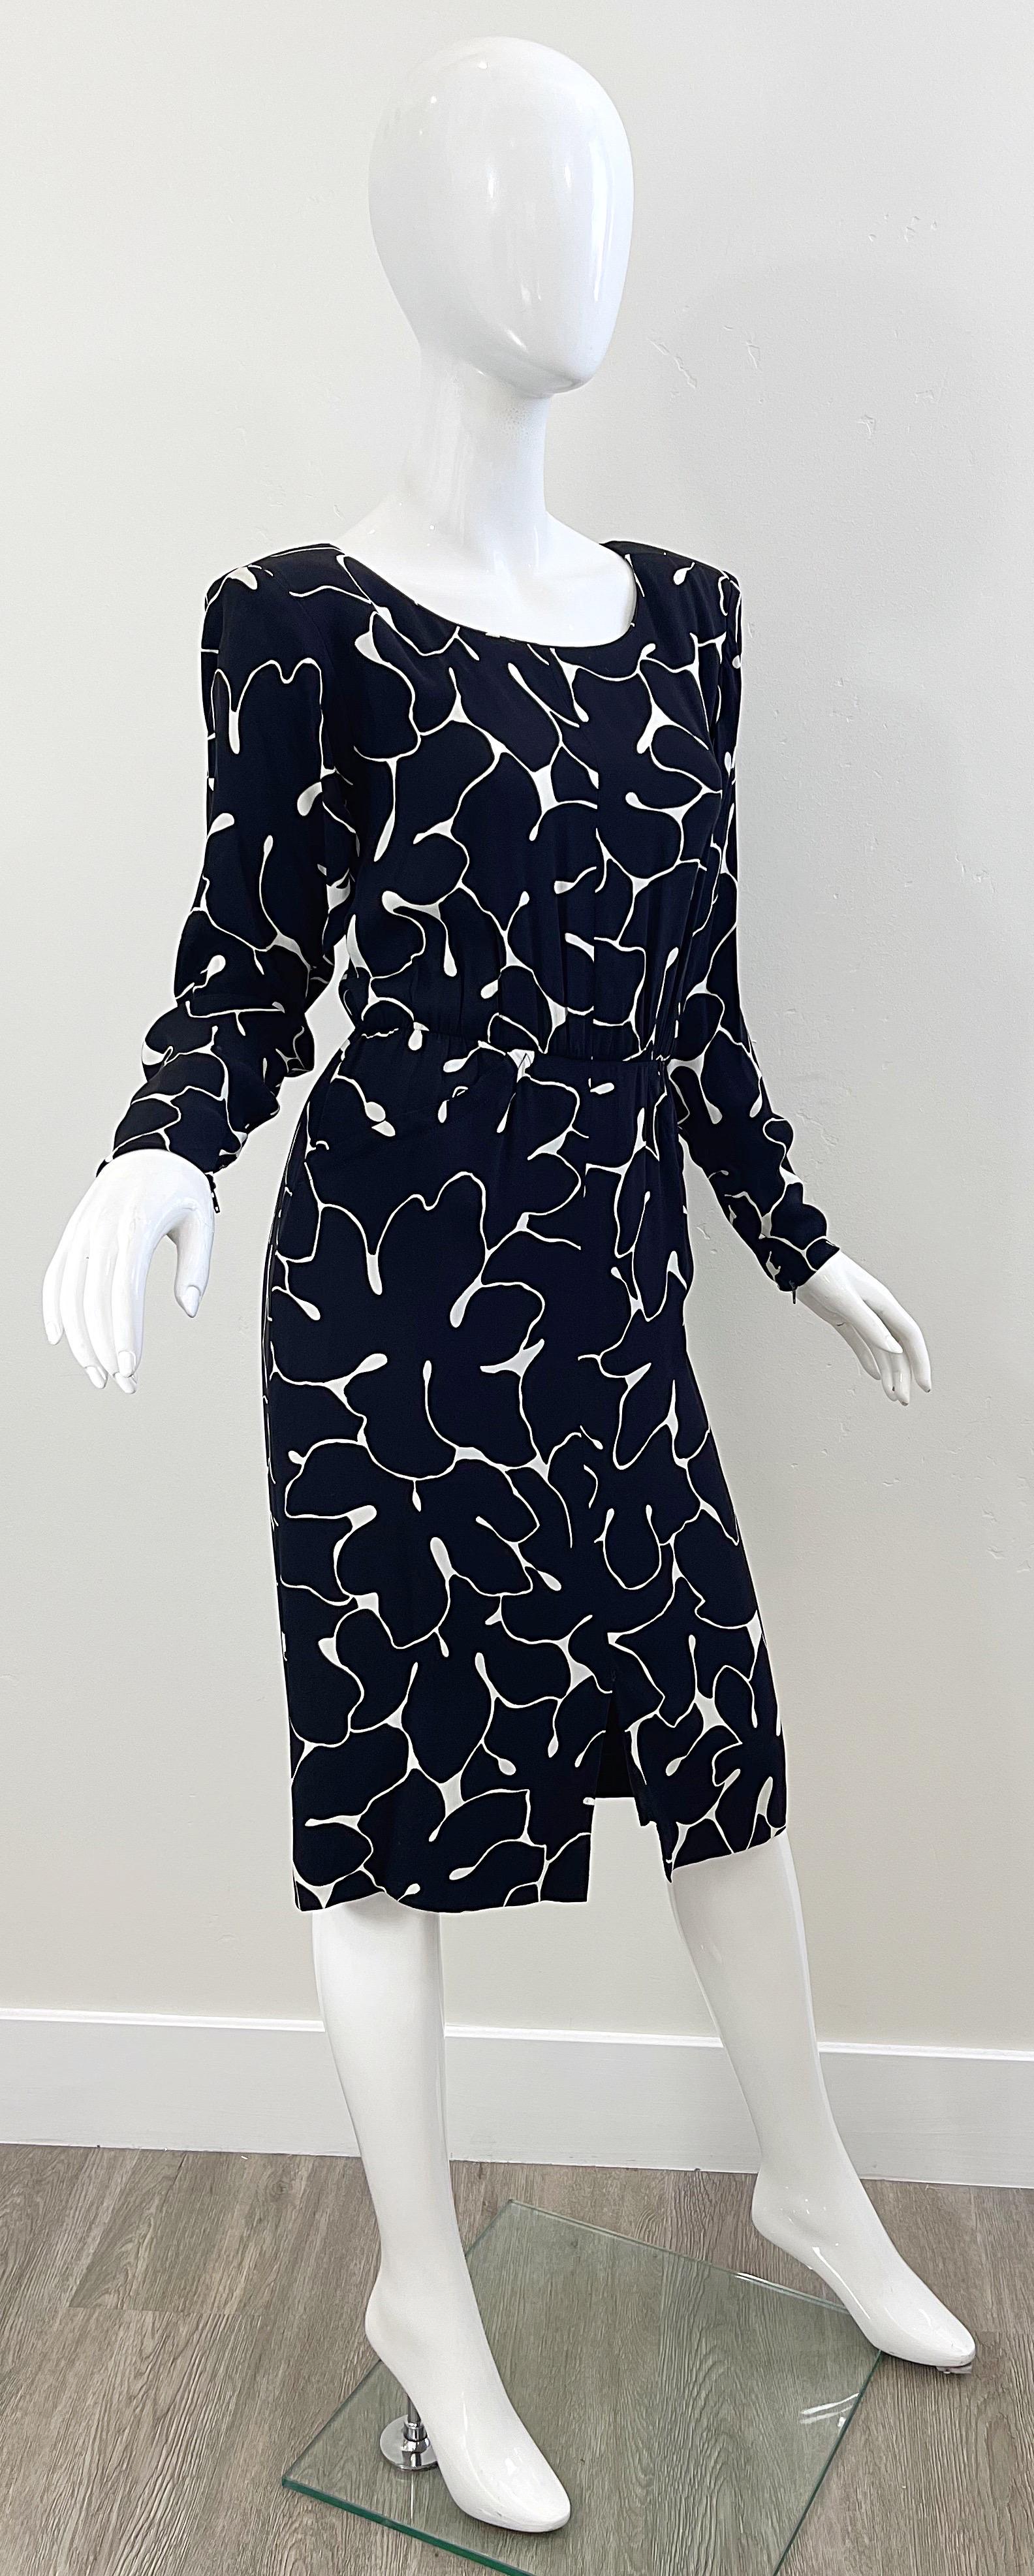 Yves Saint Laurent 1980s Black and White Abstract Flower Print Silk Crepe Dress For Sale 5